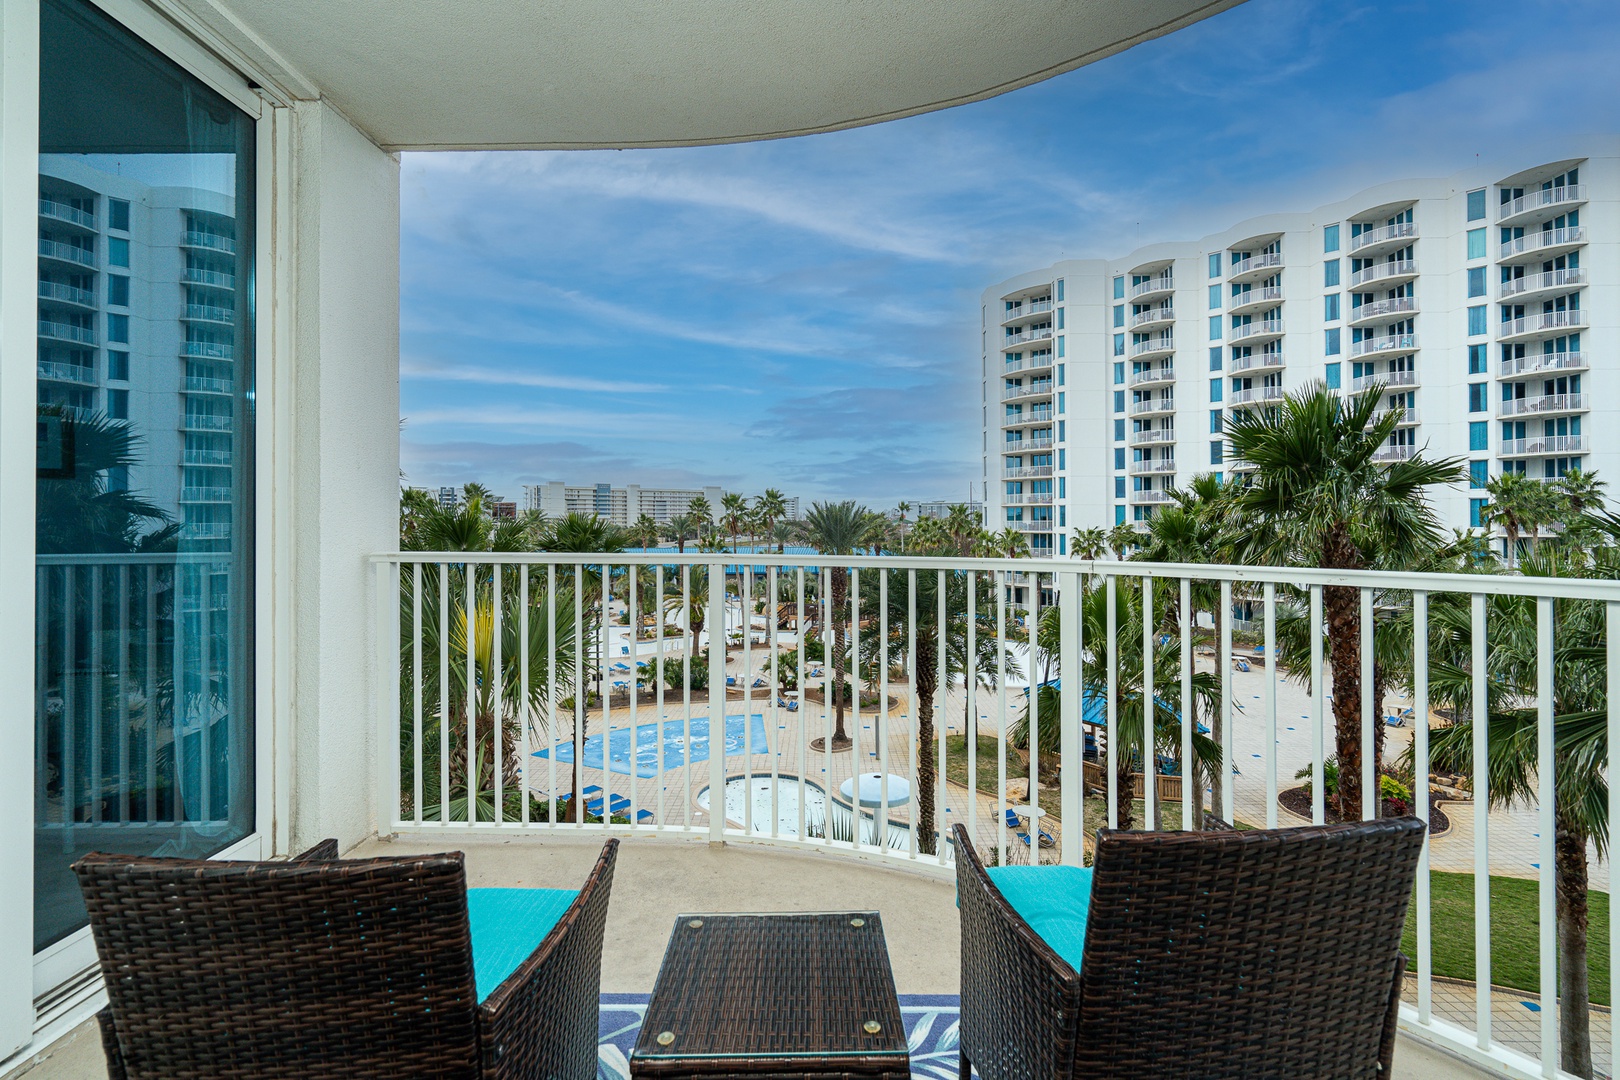 Relax on the balcony and take in the scenic pool views